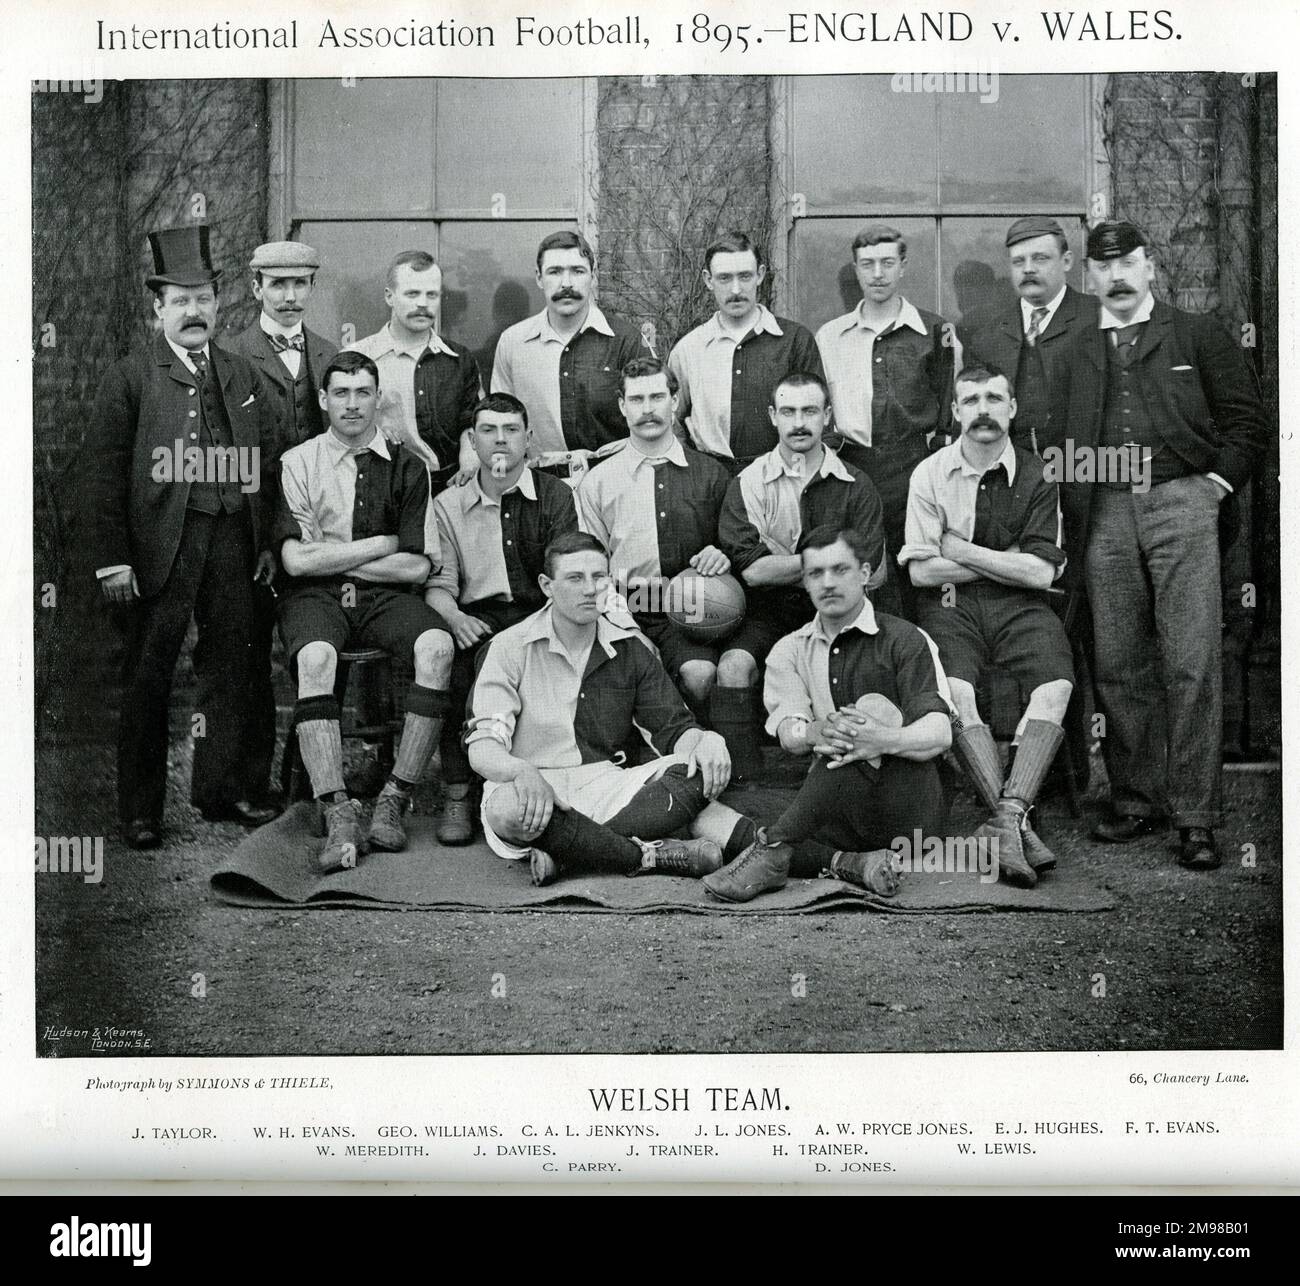 Welsh International Association Football Team, 1895, at the time they played against England: Taylor, Evans, Williams, Jenkyns, Jones, Pryce Jones, Hughes, Evans, Meredith, Davies, Trainer, Trainer, Lewis, Parry, Jones. Stock Photo